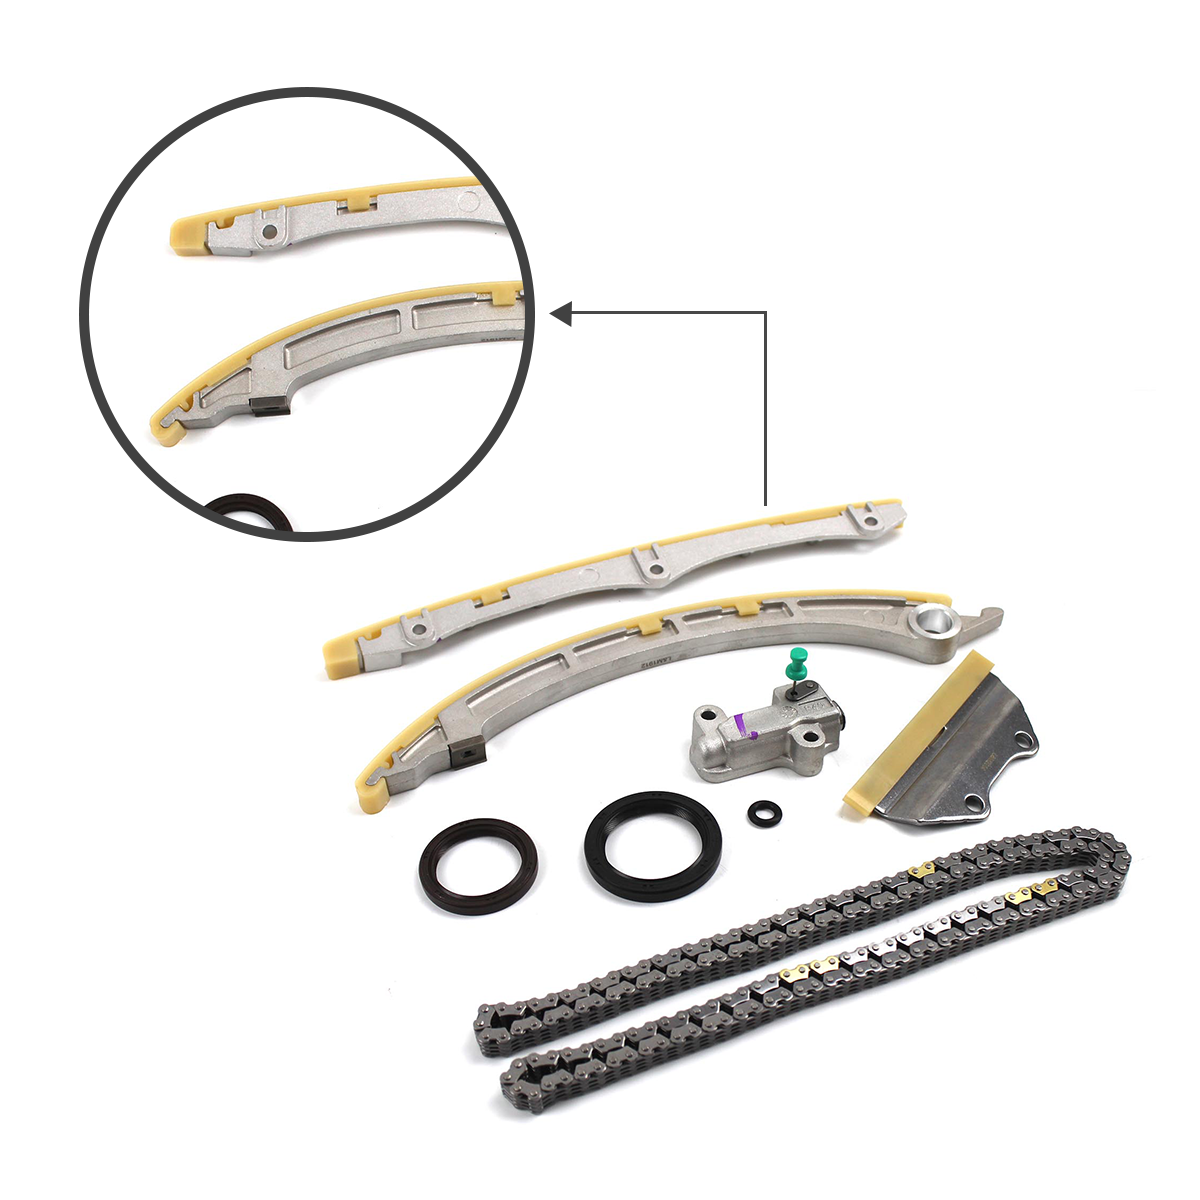 Daysyore® Timing Chain Kit for 2008-2012 Honda Accord 2009-2014 Acure 14530-RZA-A01 14510-R40-A01 TSX 2.4 K24